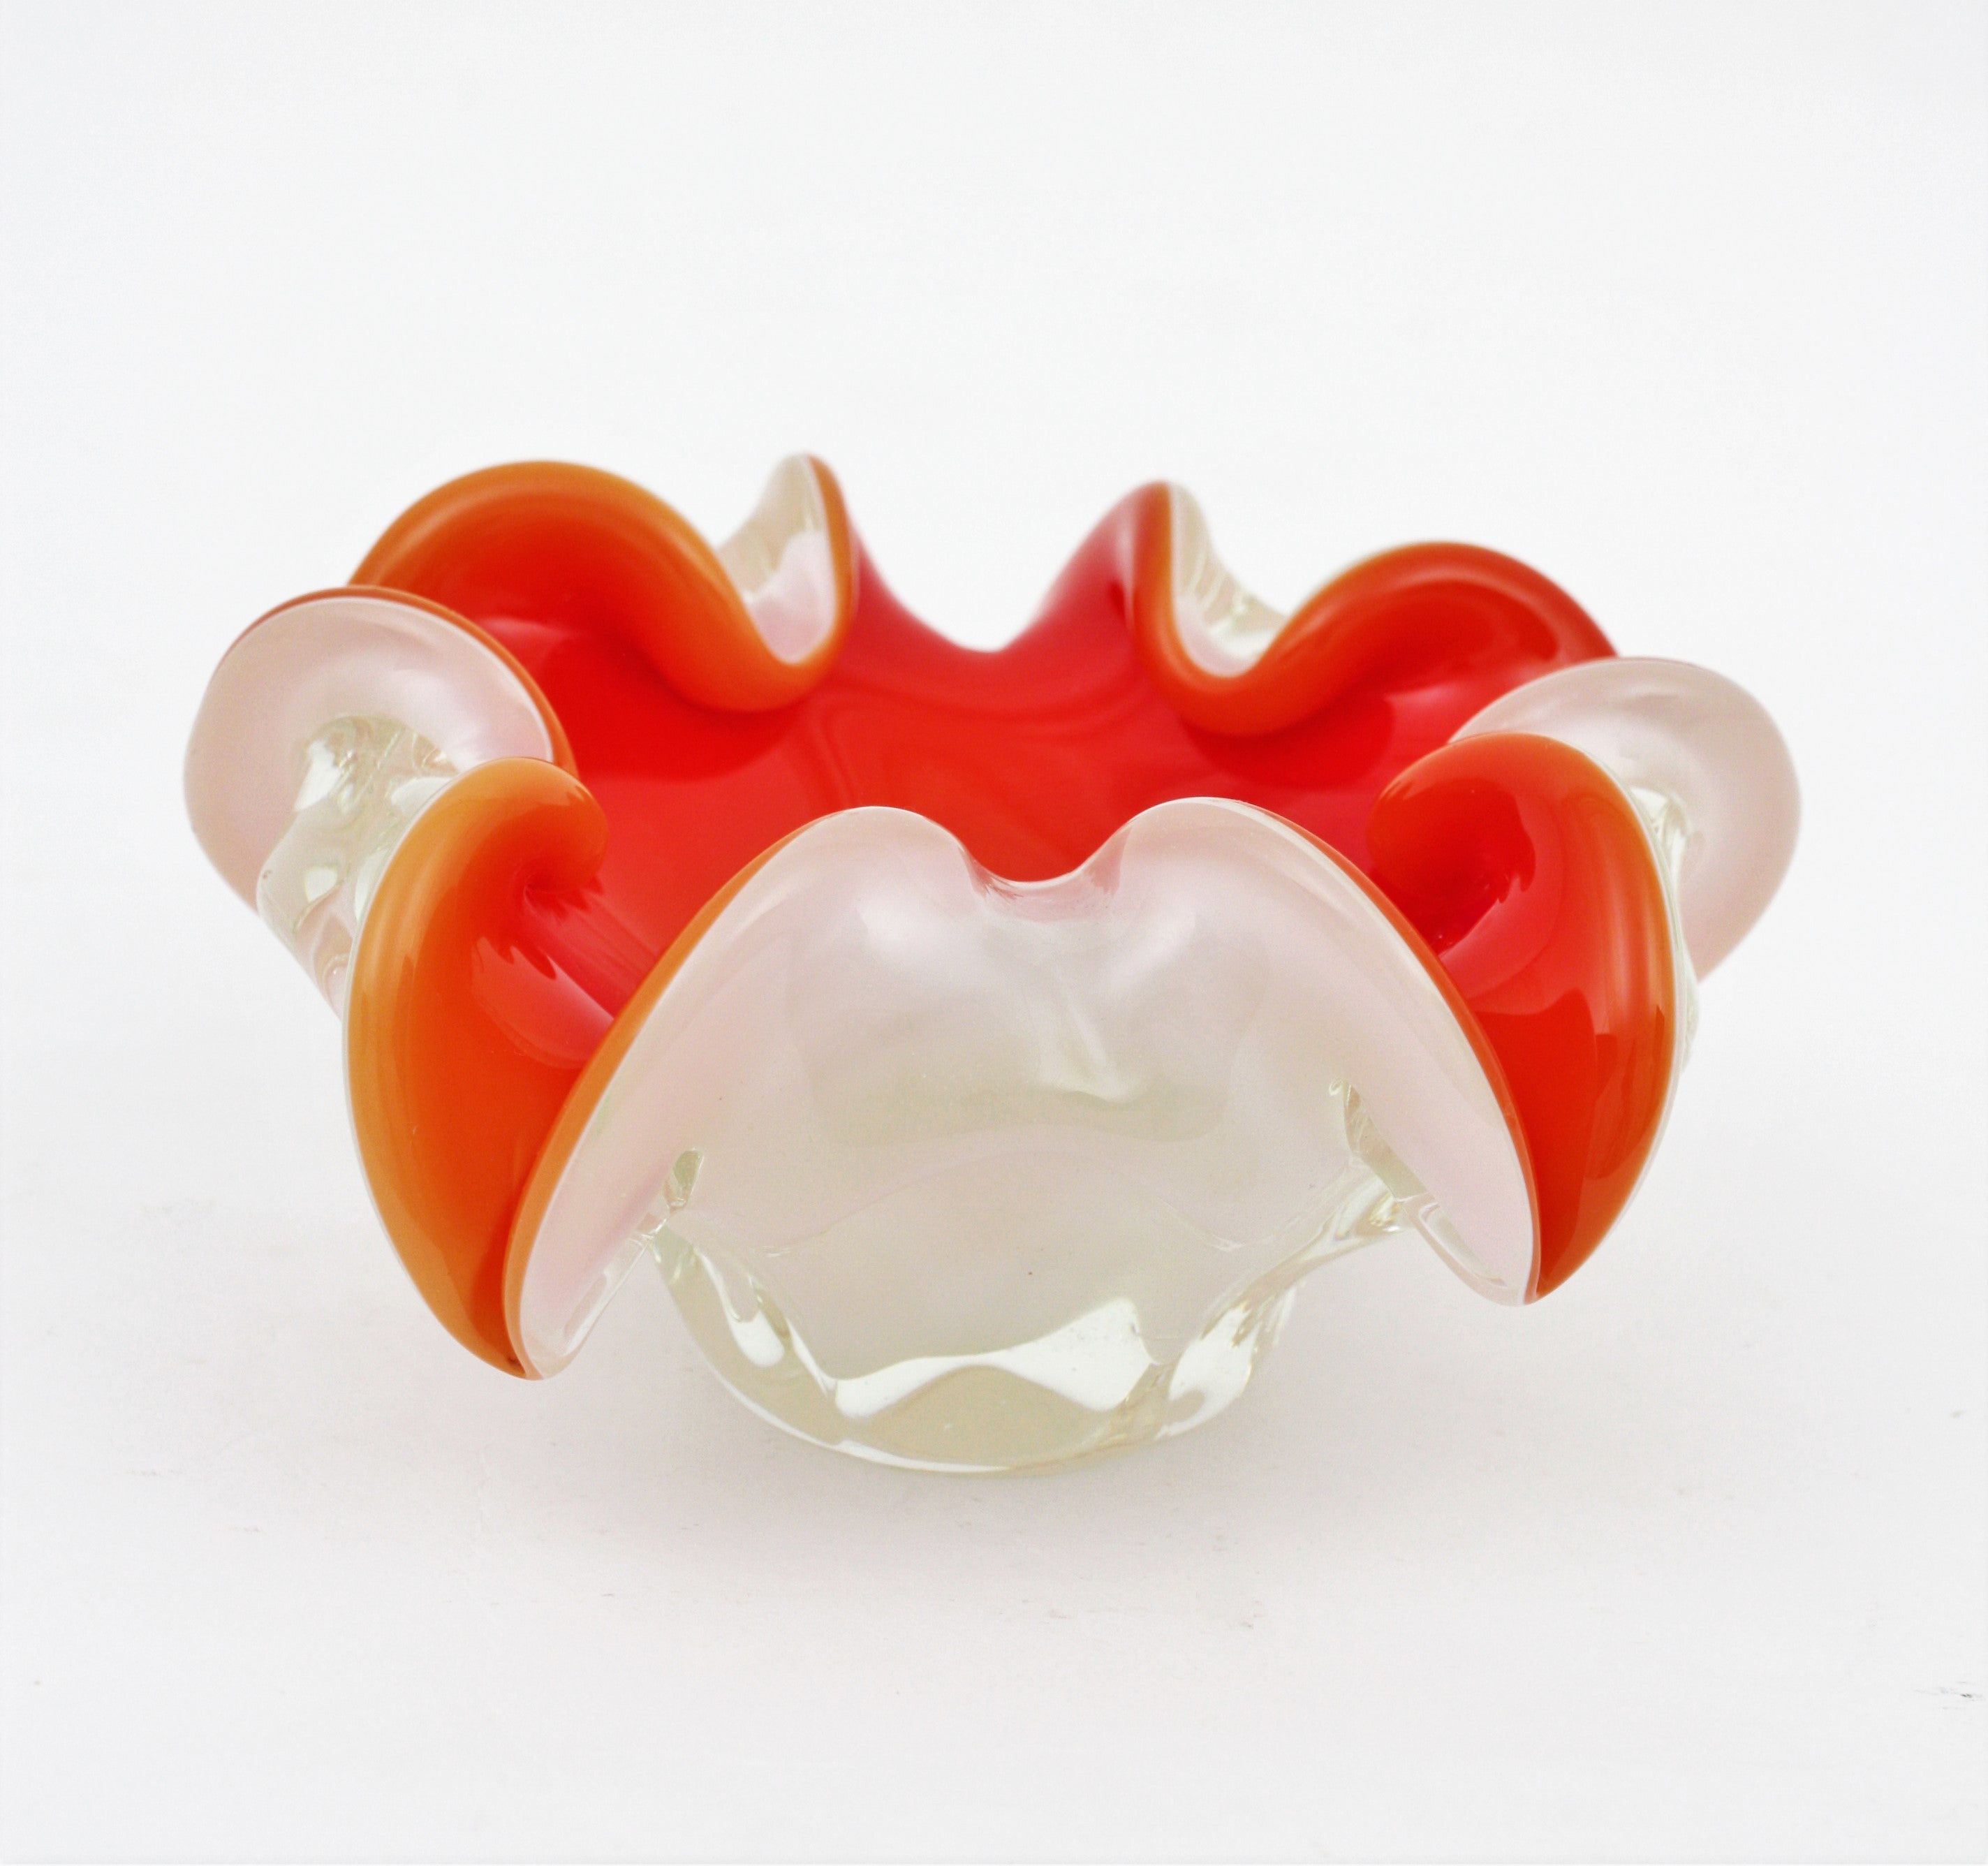 Flower Bowl / Vide-Poche / Ashtray,  Murano Glass, Italy, 1960s
Amazing hand blown Murano glass artistic flower shaped bowl or ashtray in vibrant red color and white.
Red glass and white opaline glass cased into clear glass.
This decorative bowl